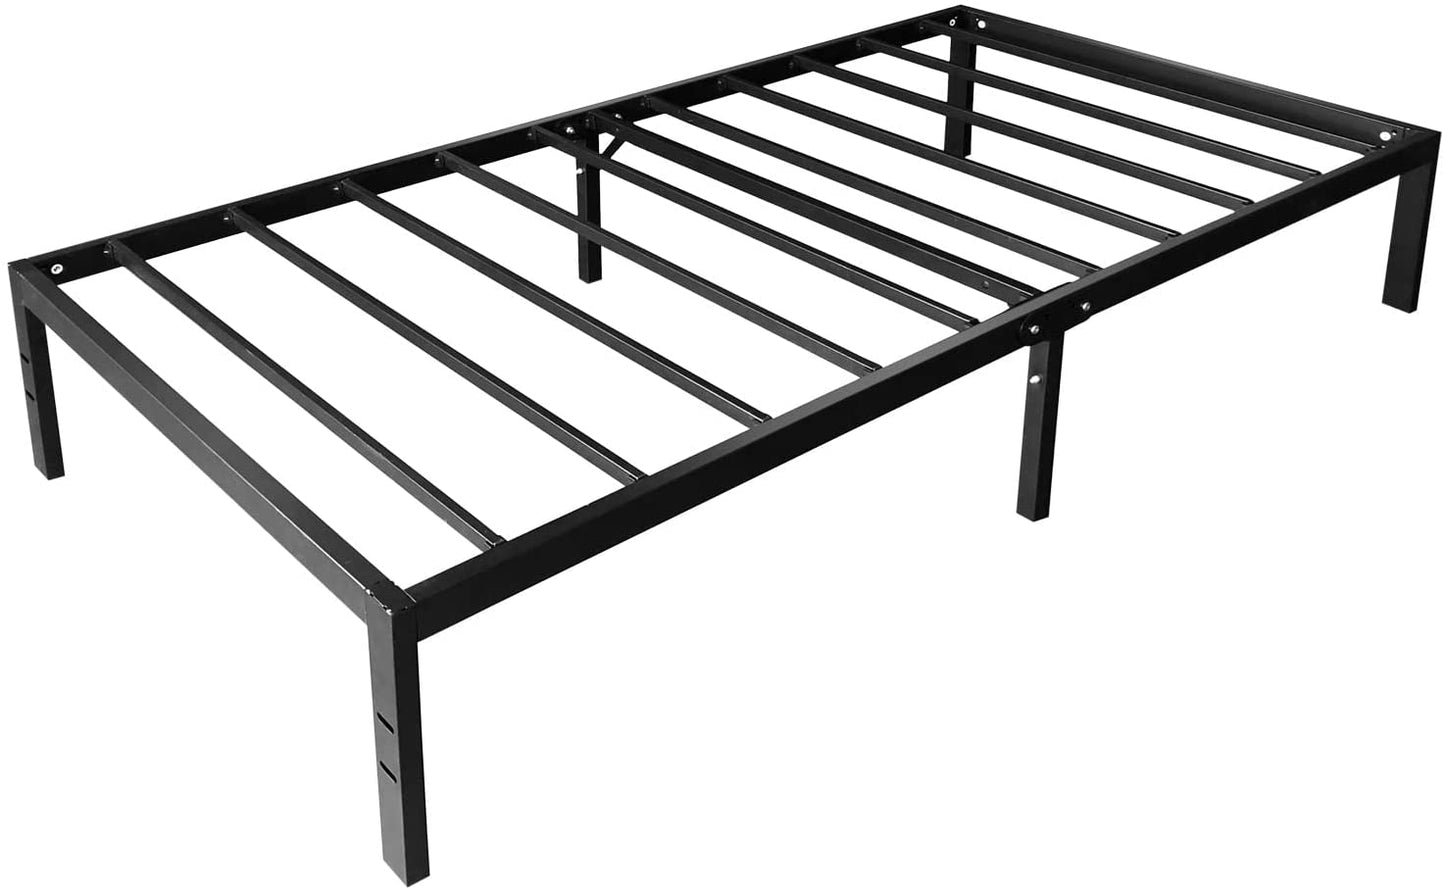 UNICOO - Metal Platform Bed Frame Heavy Duty Steel Slat/ Anti-Slip Support/ Easy Assembly/ Mattress Foundation/ Bed Frame/ Noise Free/ No Box Spring Needed